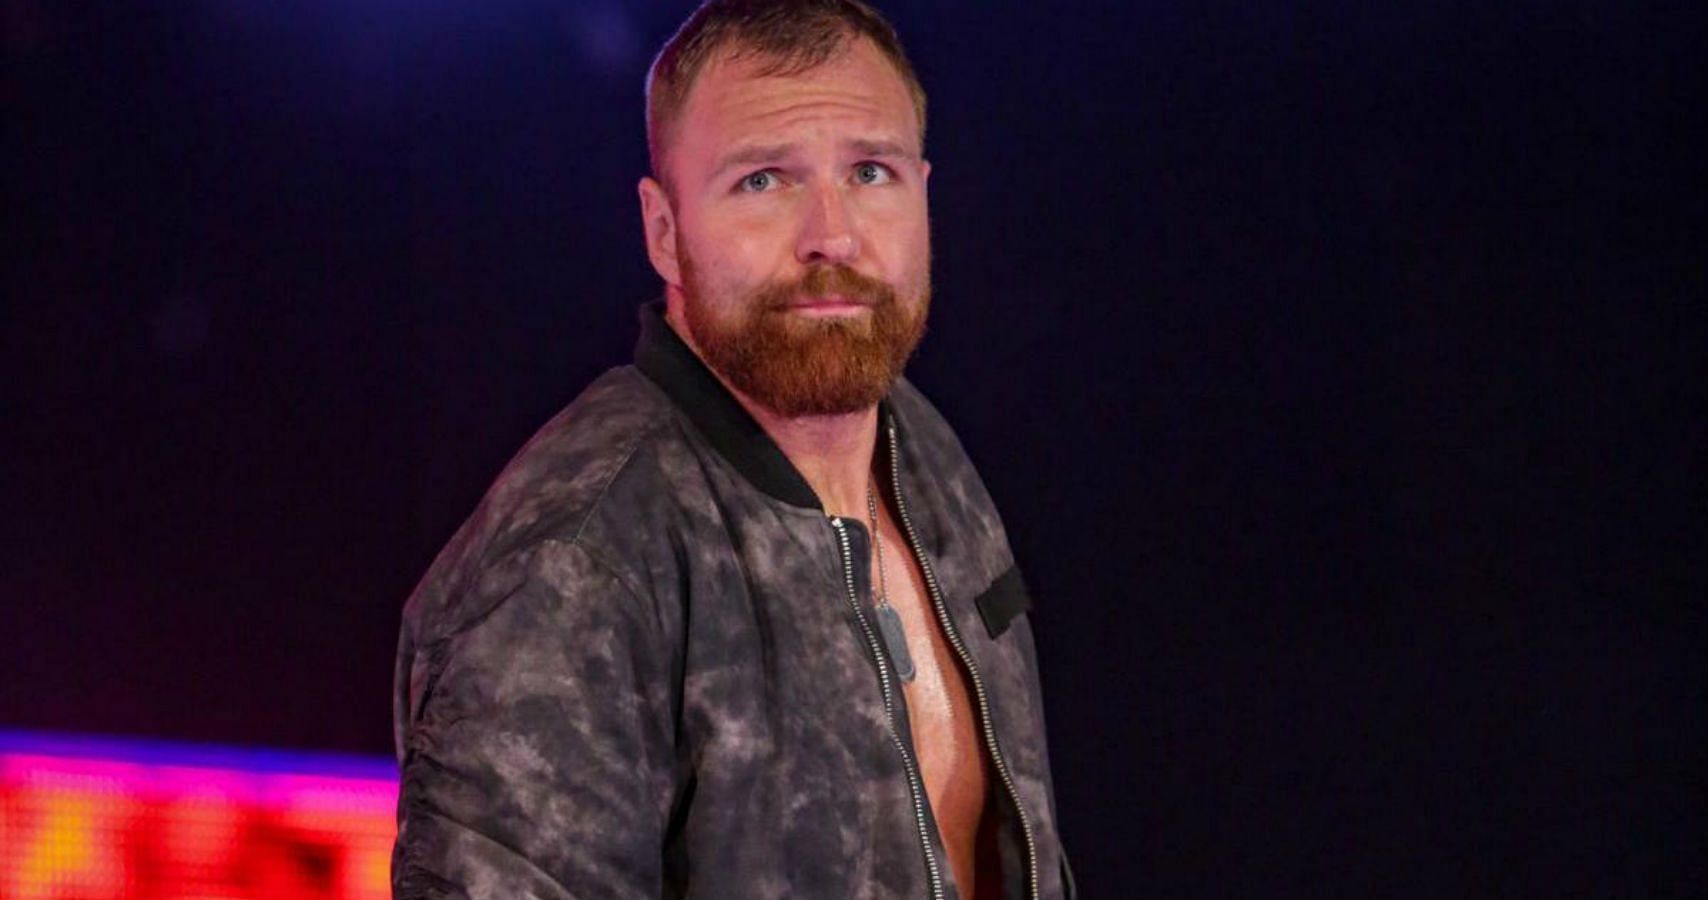 Jon Moxley during his time in WWE as Dean Ambrose